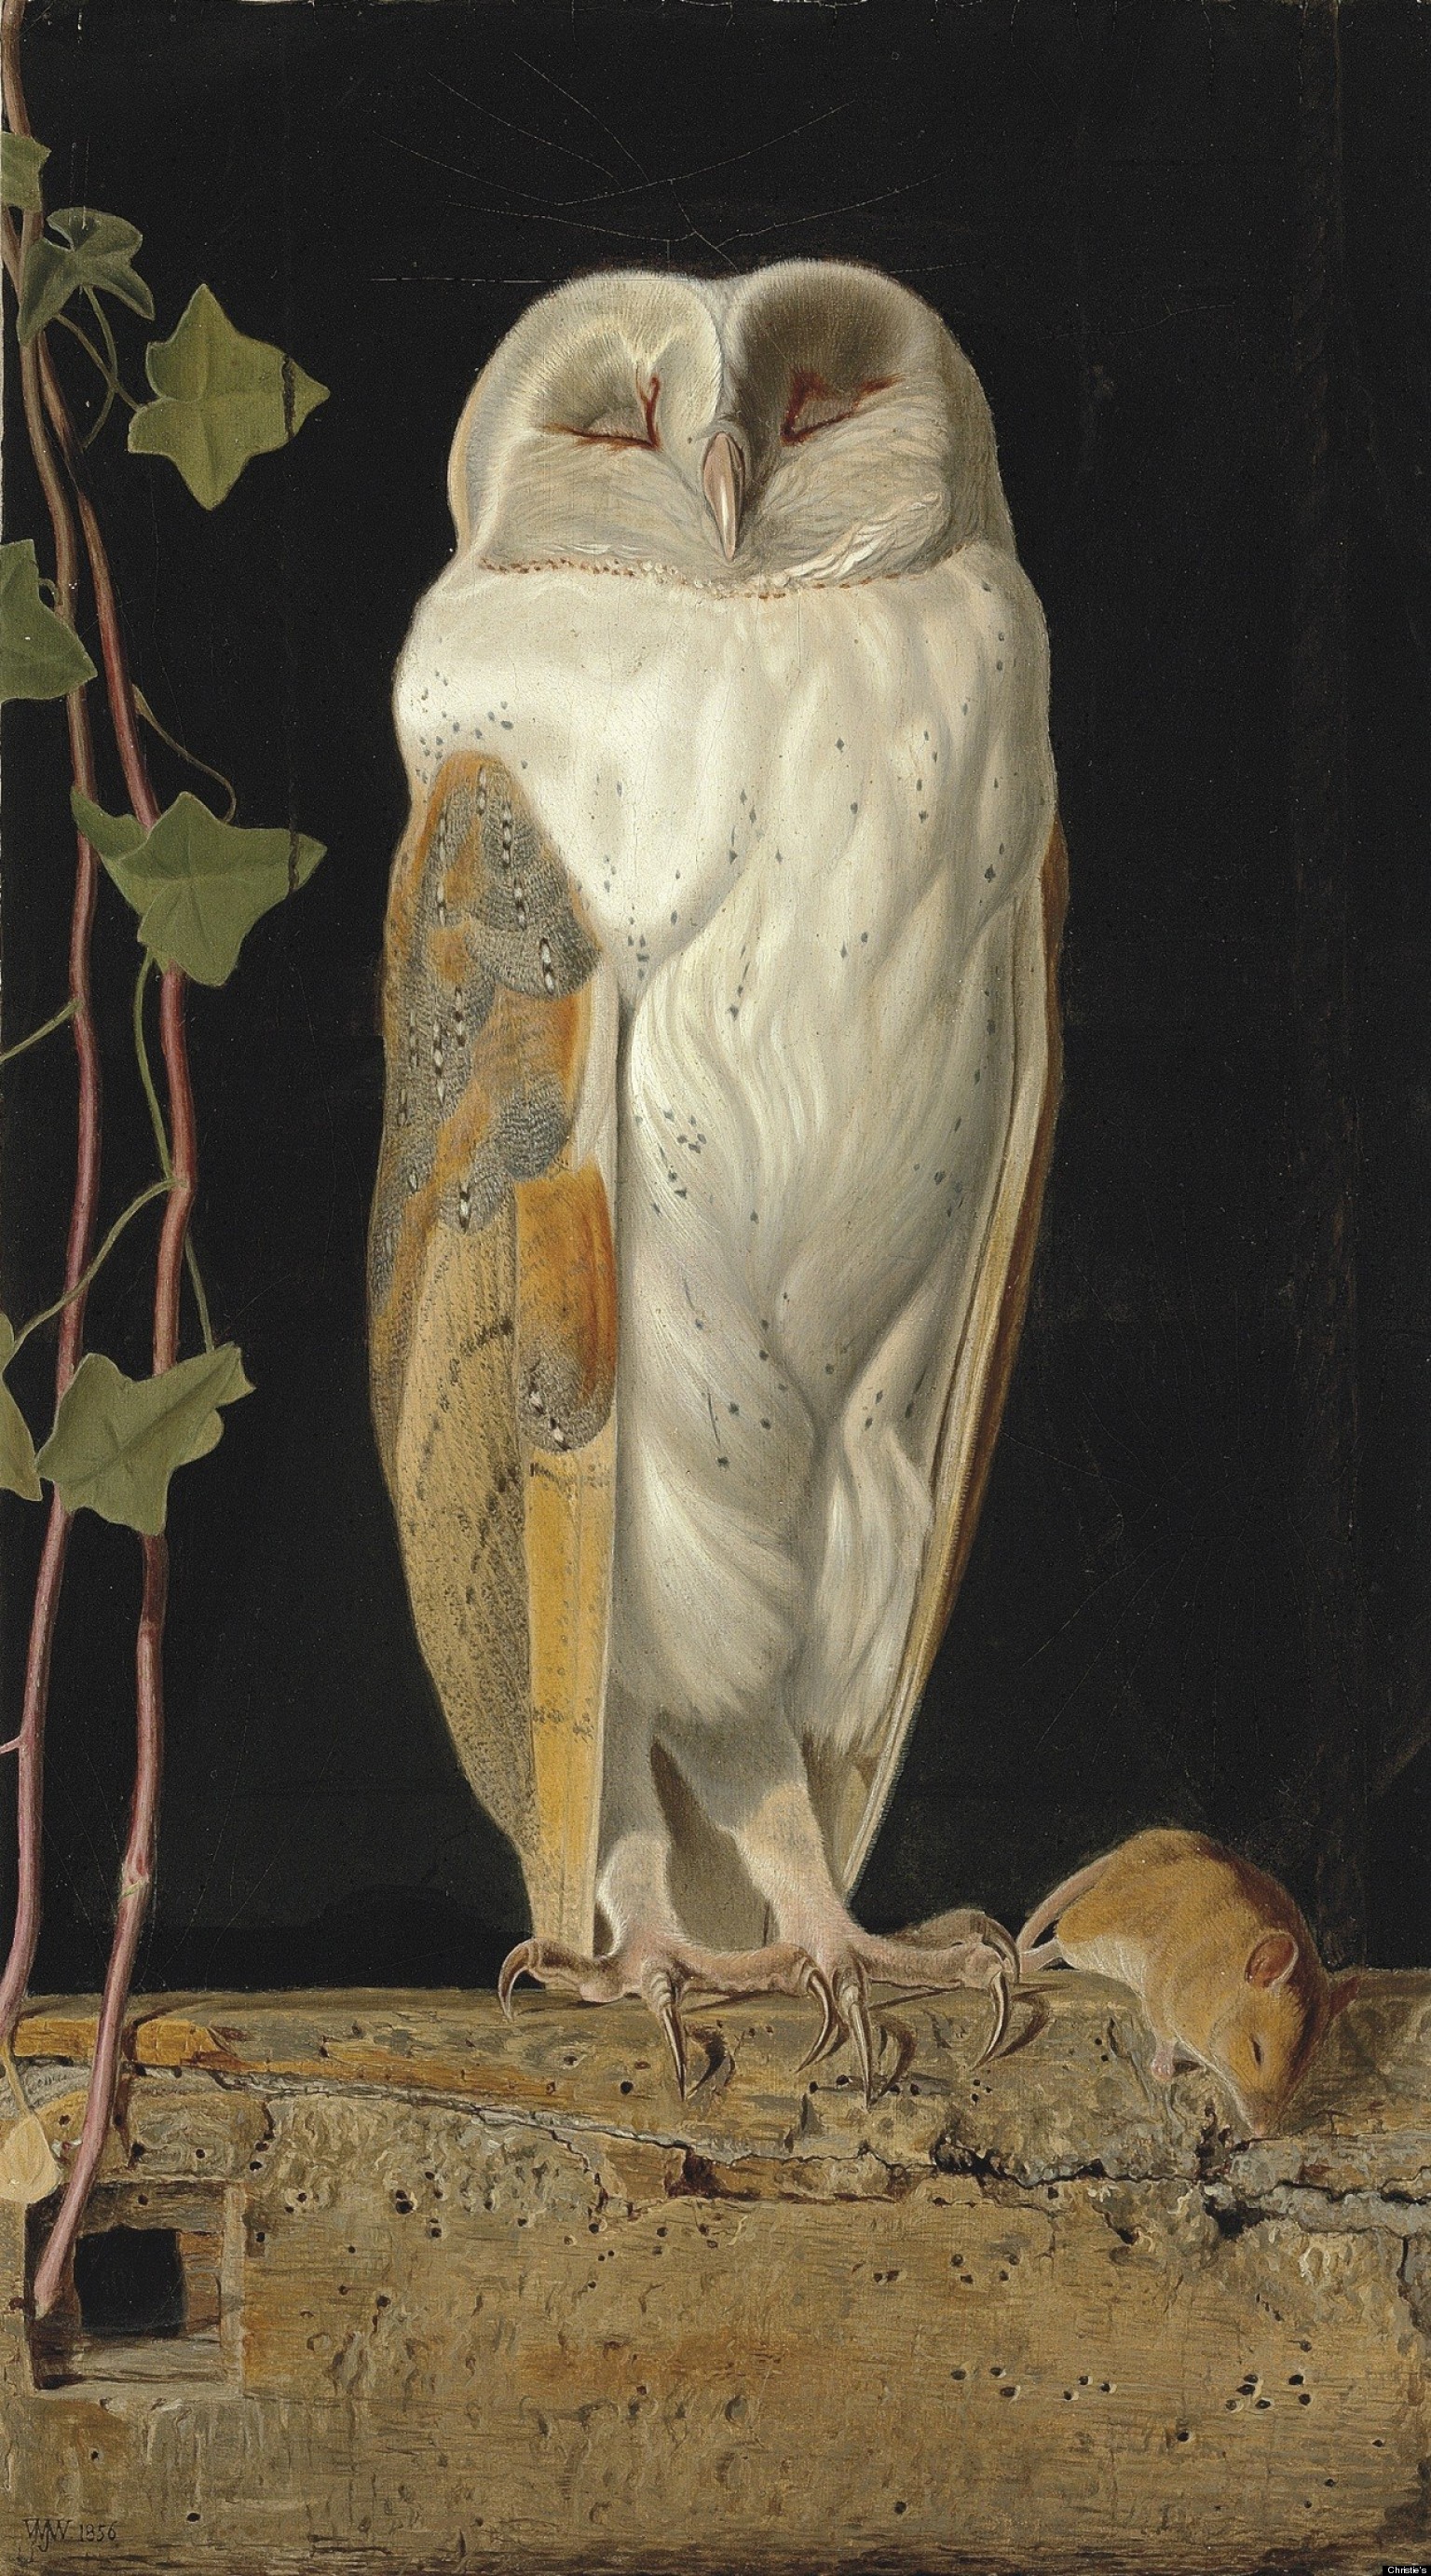 Attic Owl Painting Sells For Nearly 1 Million At Christie